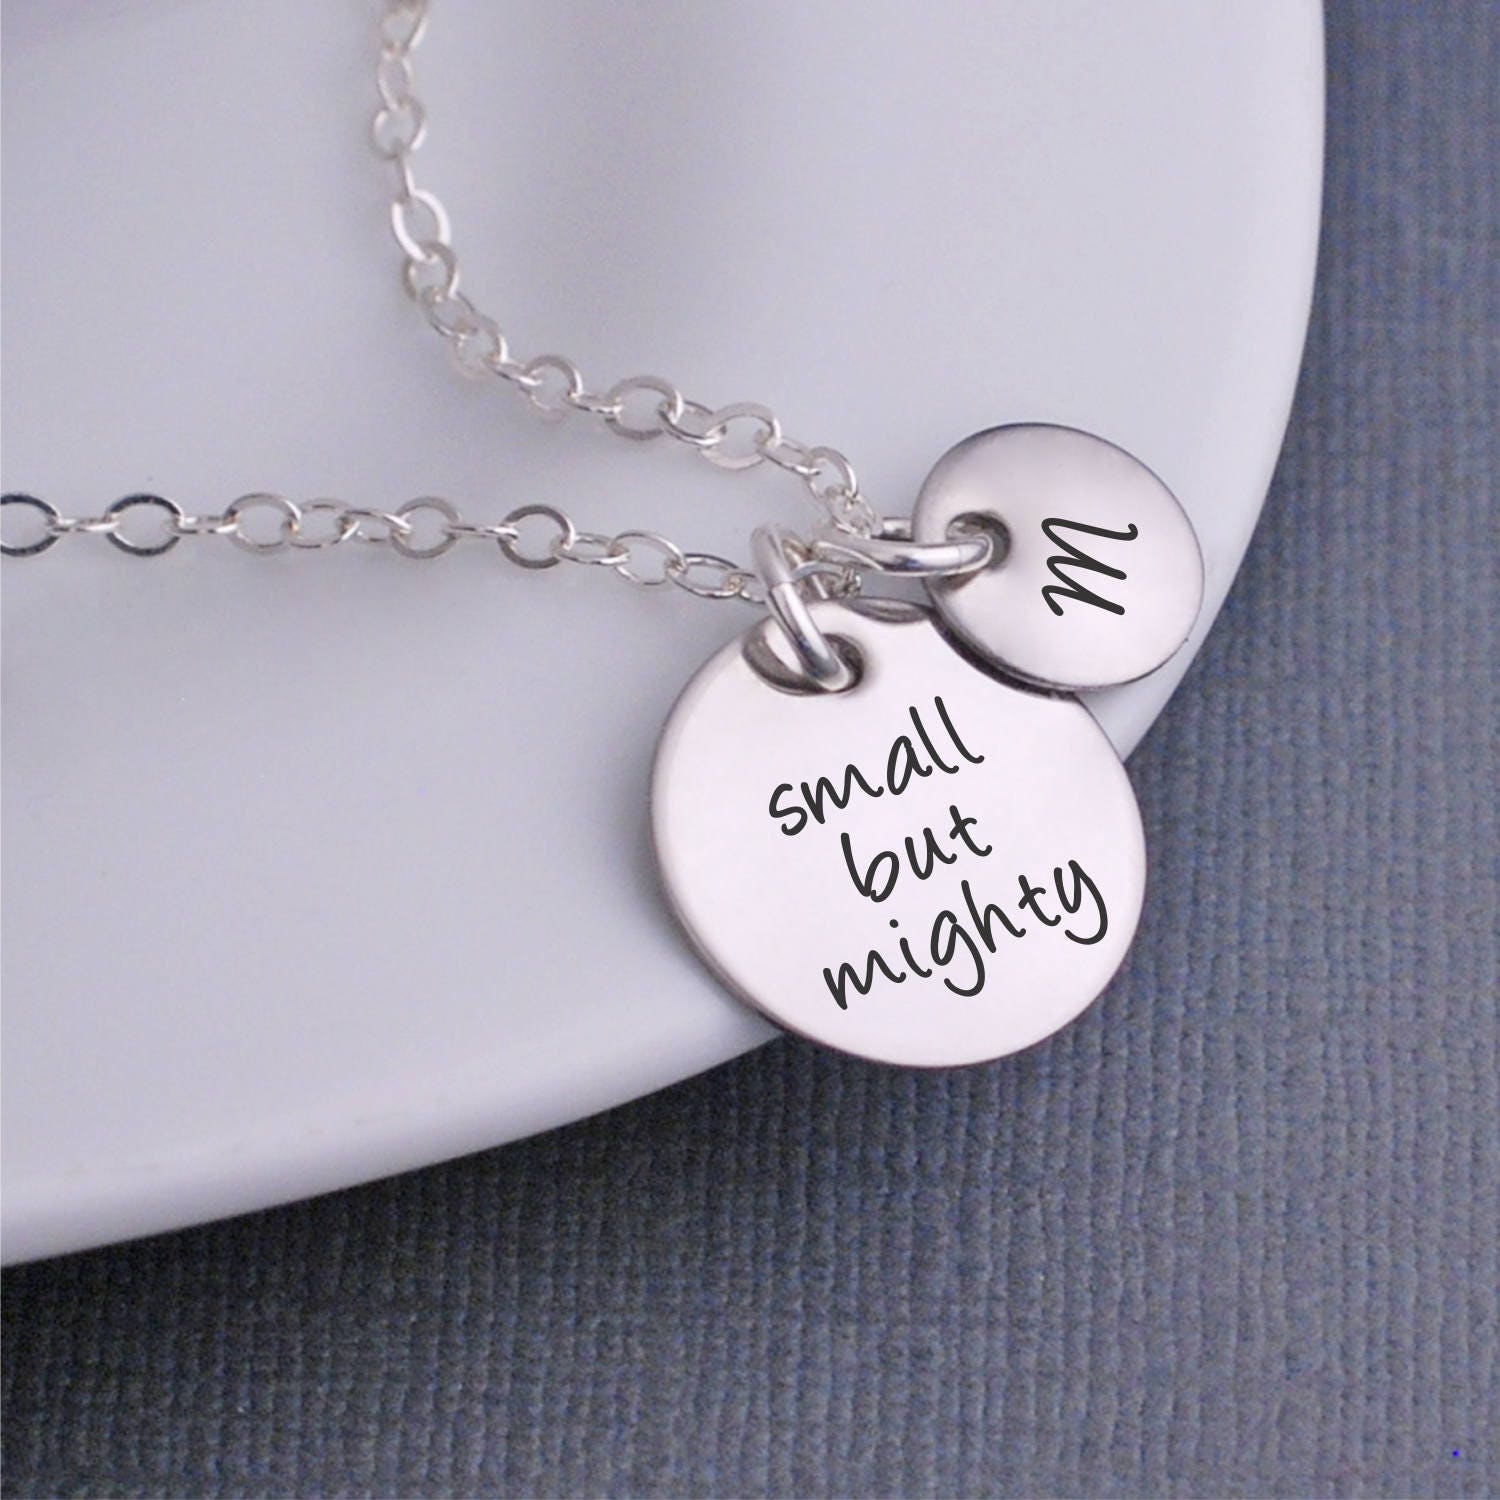 Small But Mighty Necklace Gift For Daughter Inspirational Etsy